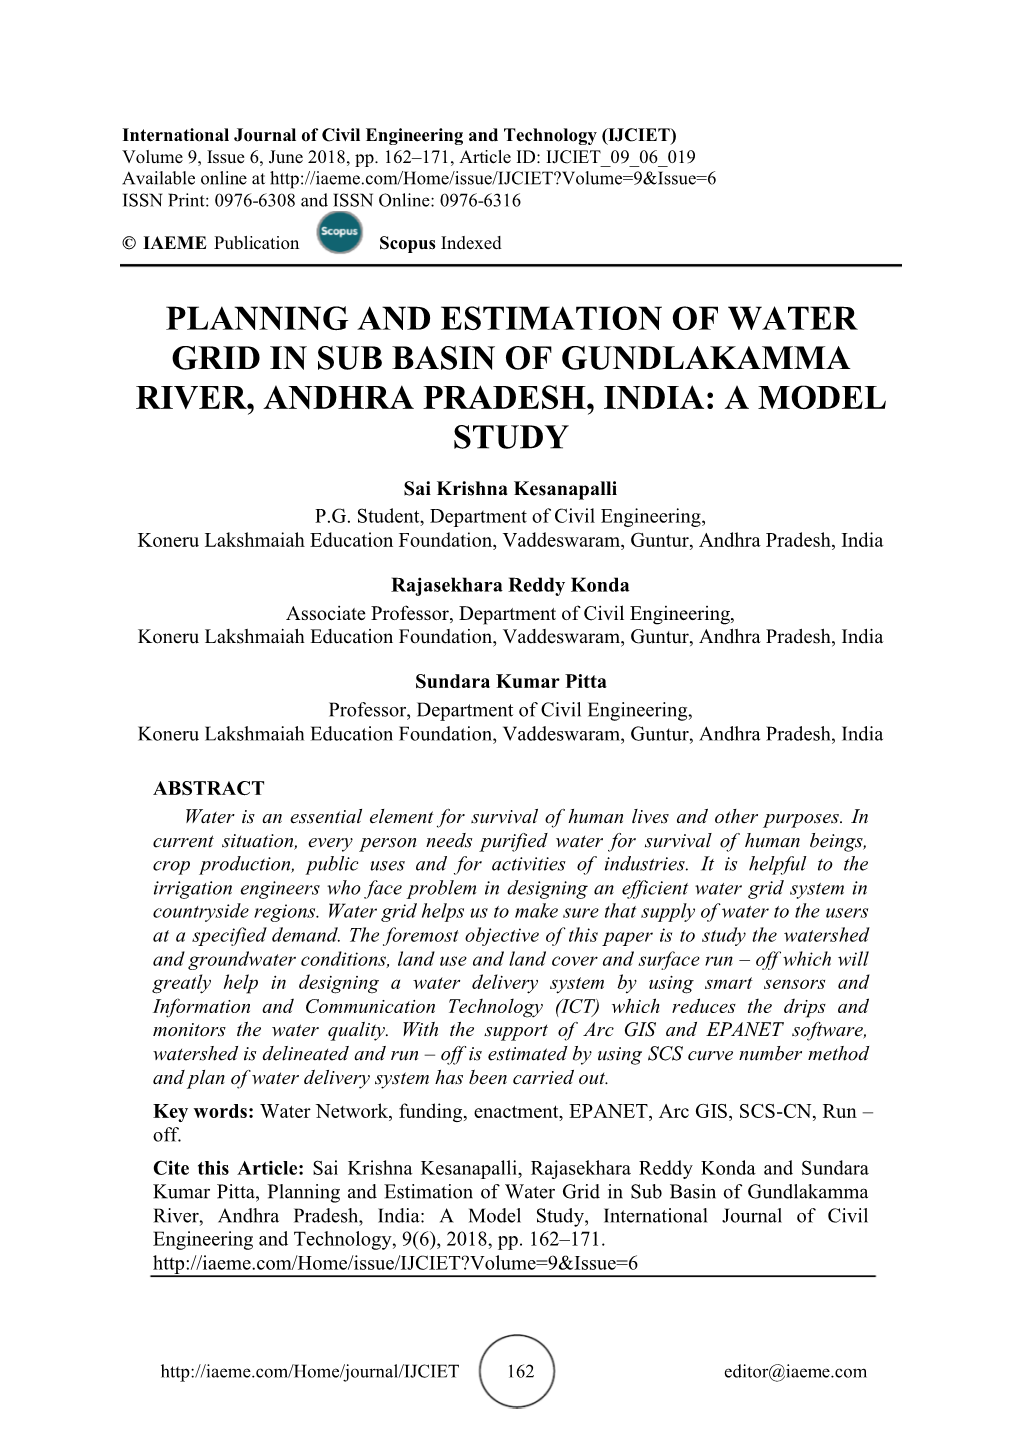 Planning and Estimation of Water Grid in Sub Basin of Gundlakamma River, Andhra Pradesh, India: a Model Study